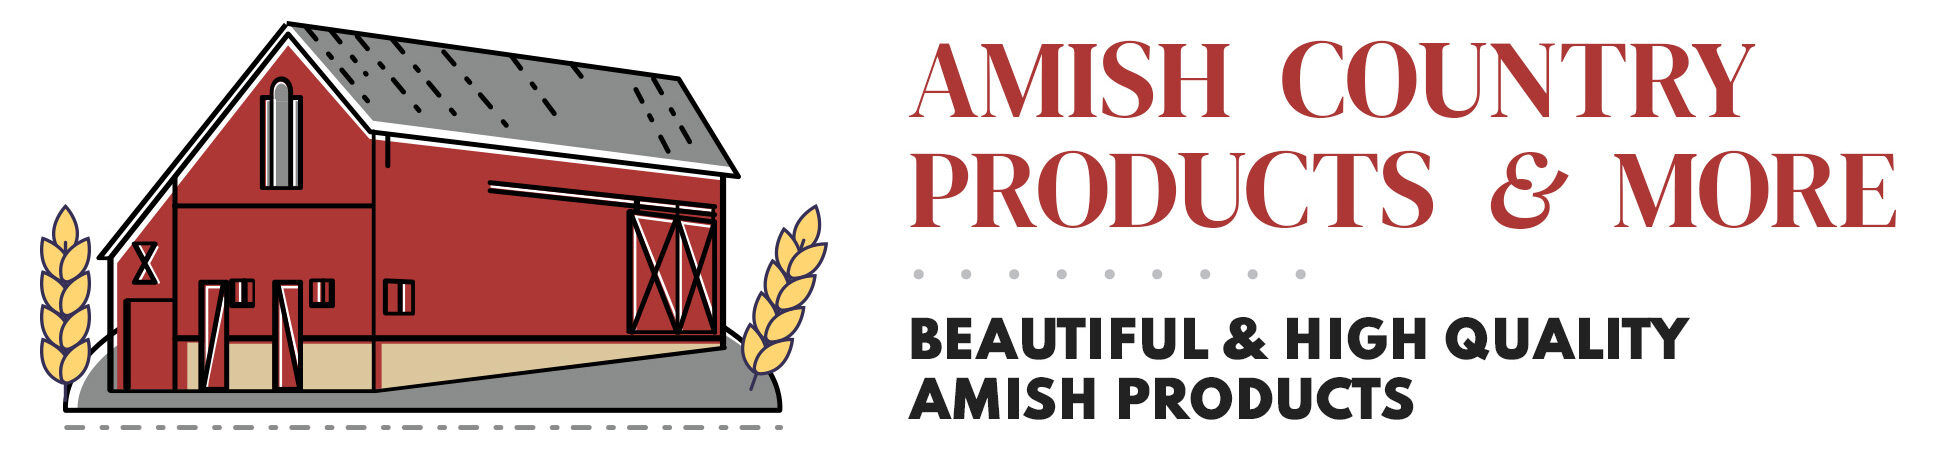 Amish Country Products & More